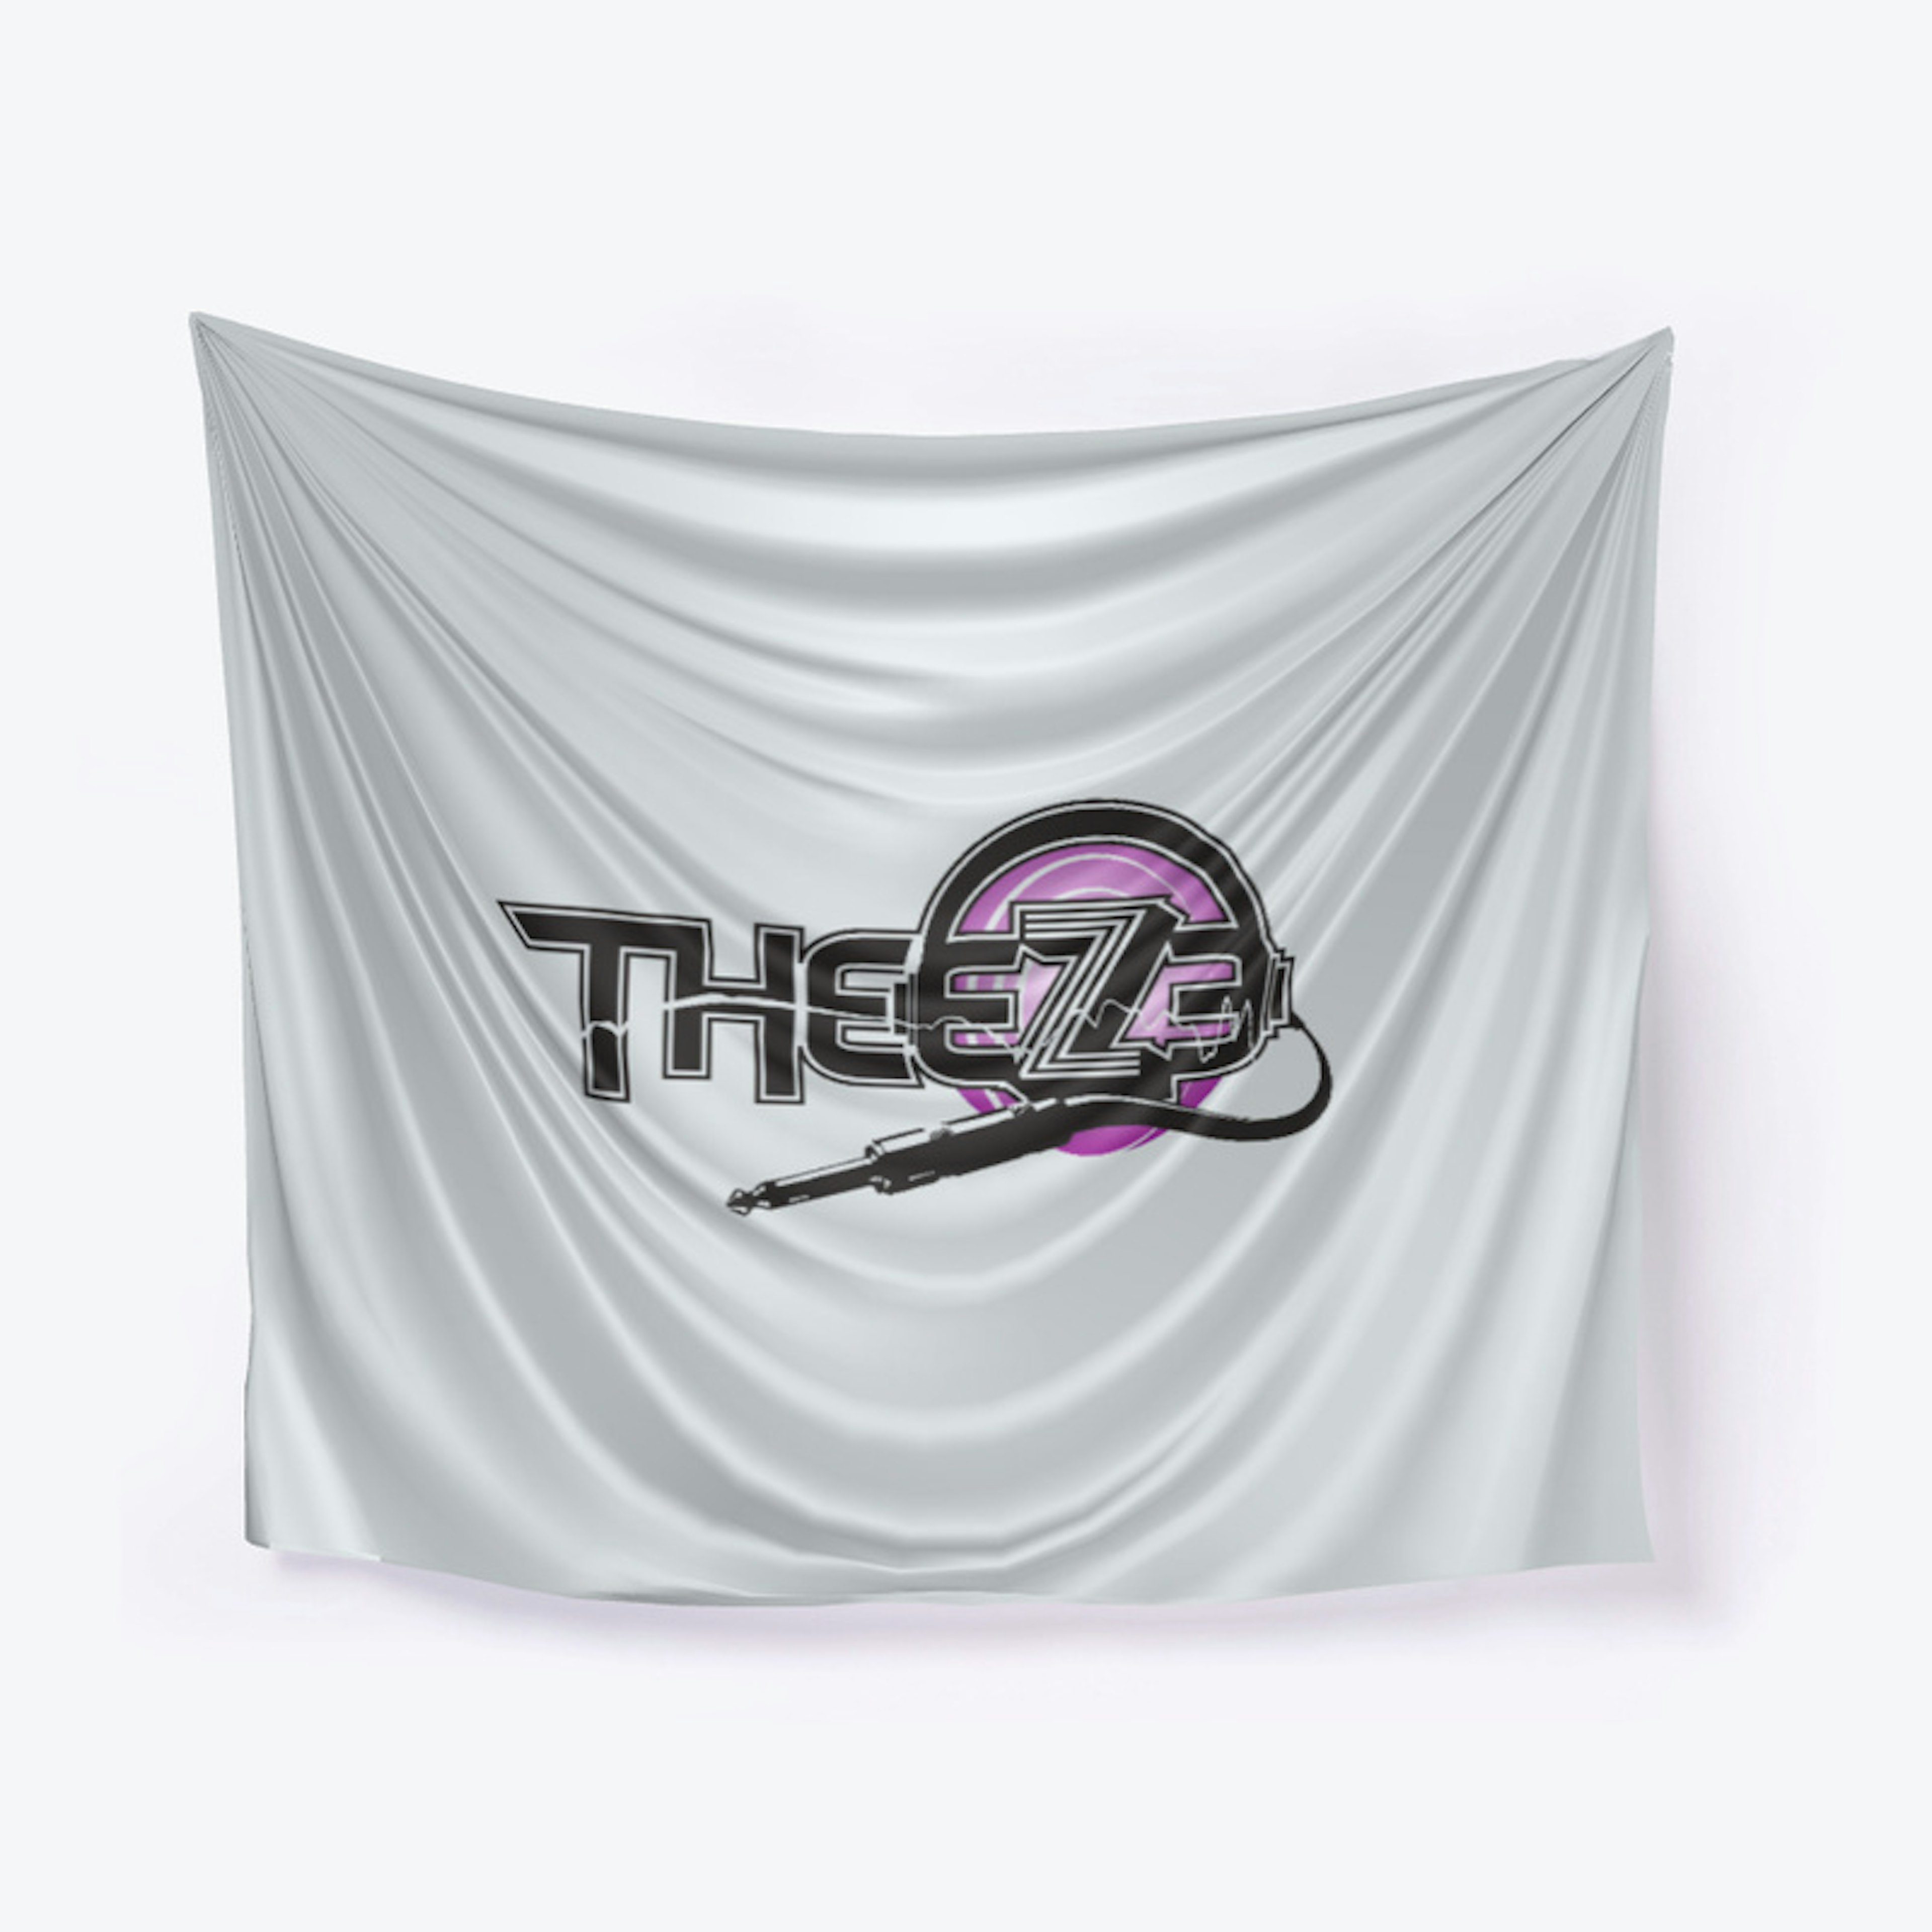 THEZE - The Best Word Ever